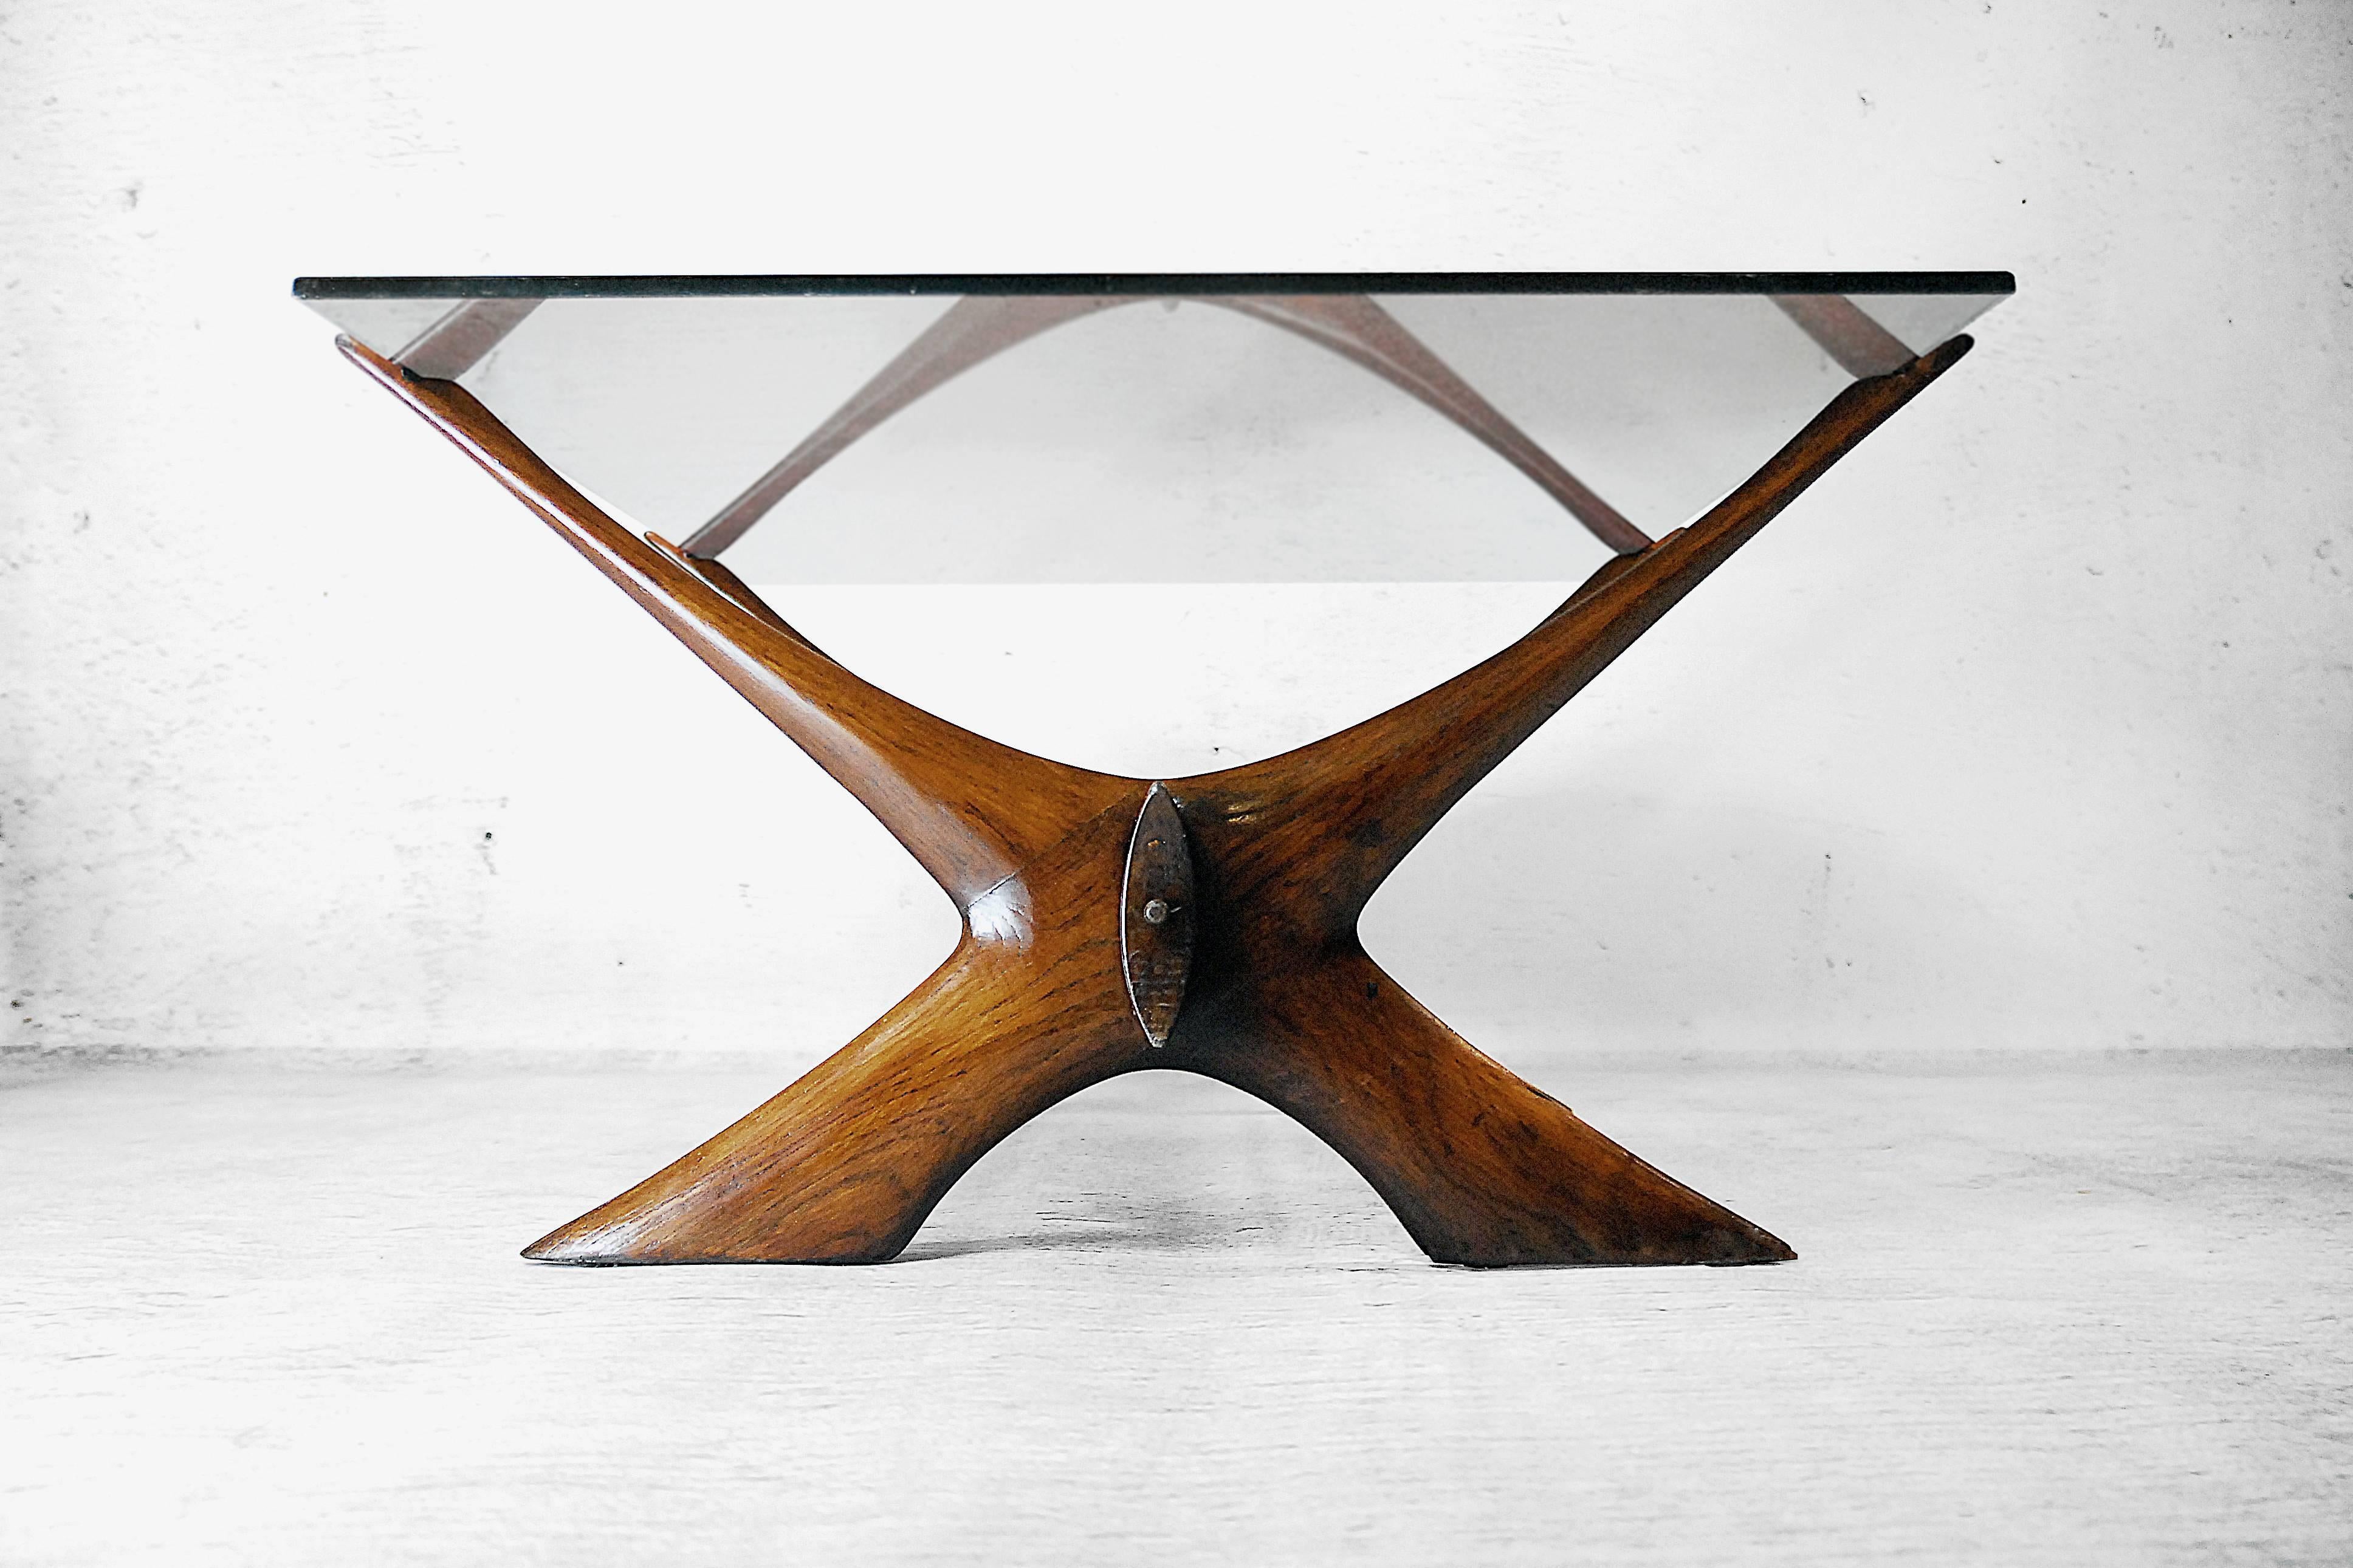 This sculptured organic Danish coffee table was designed by Illum Wikkelsø. Manufactured by Søren Willadsen, who also produced designs for Finn Juhl and Nanna Ditzel, it is handcrafted from solid walnut. The distinct frame is contrasted by a linear